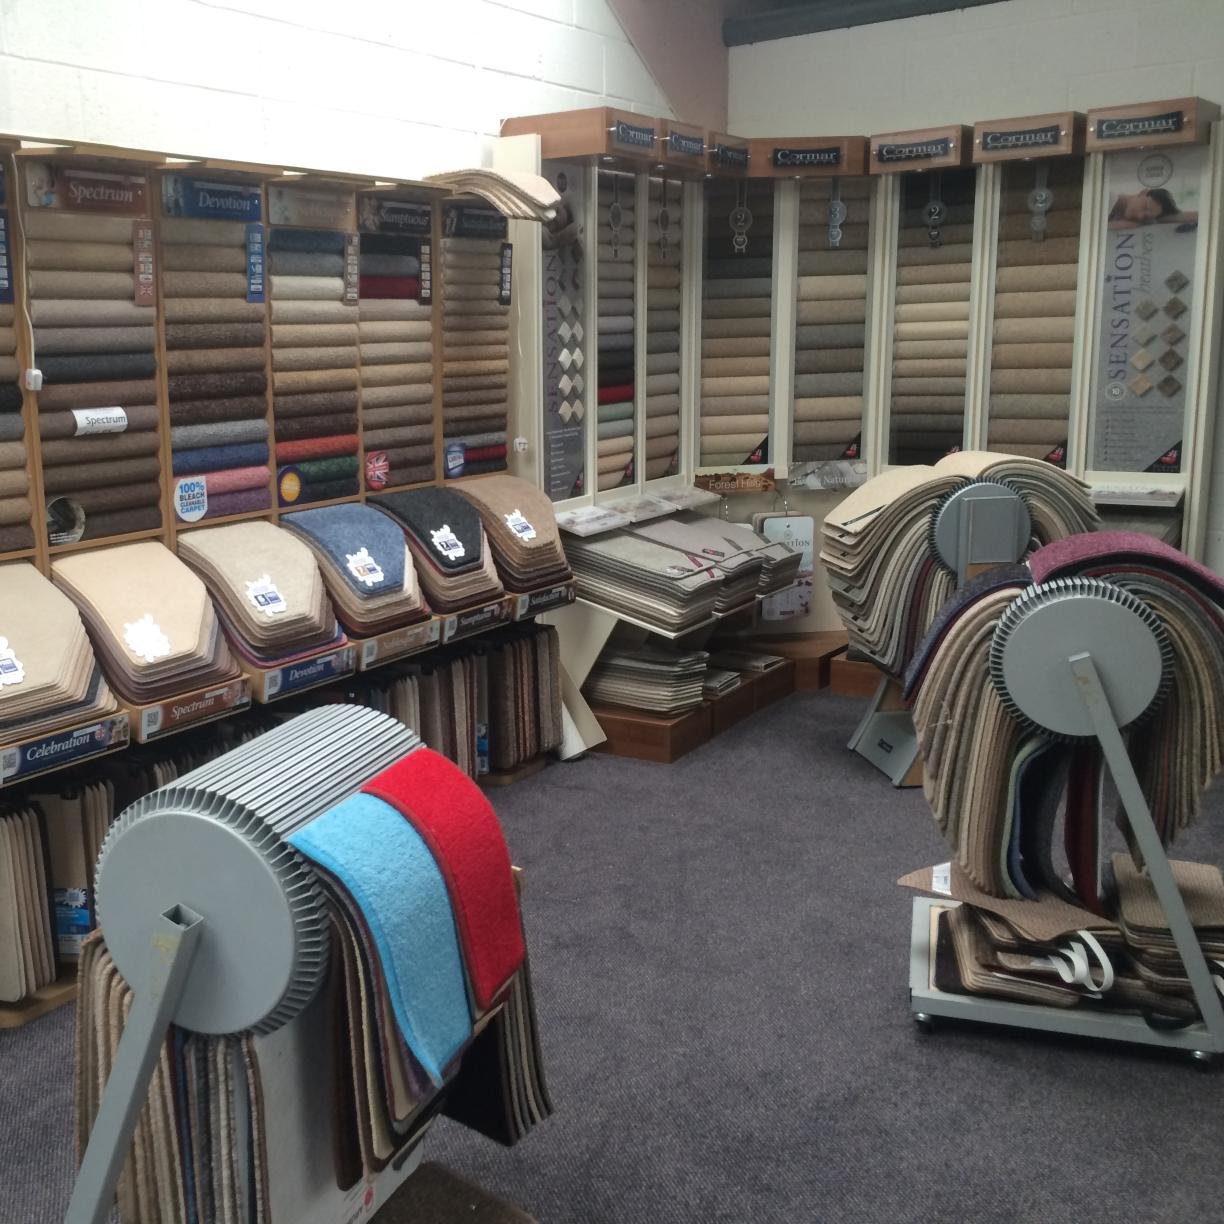 Clive Harrison Carpets is the destination for discerning companies throughout Cornwall, with its carpets and competitive pricing. https://t.co/l8dGWZpe98